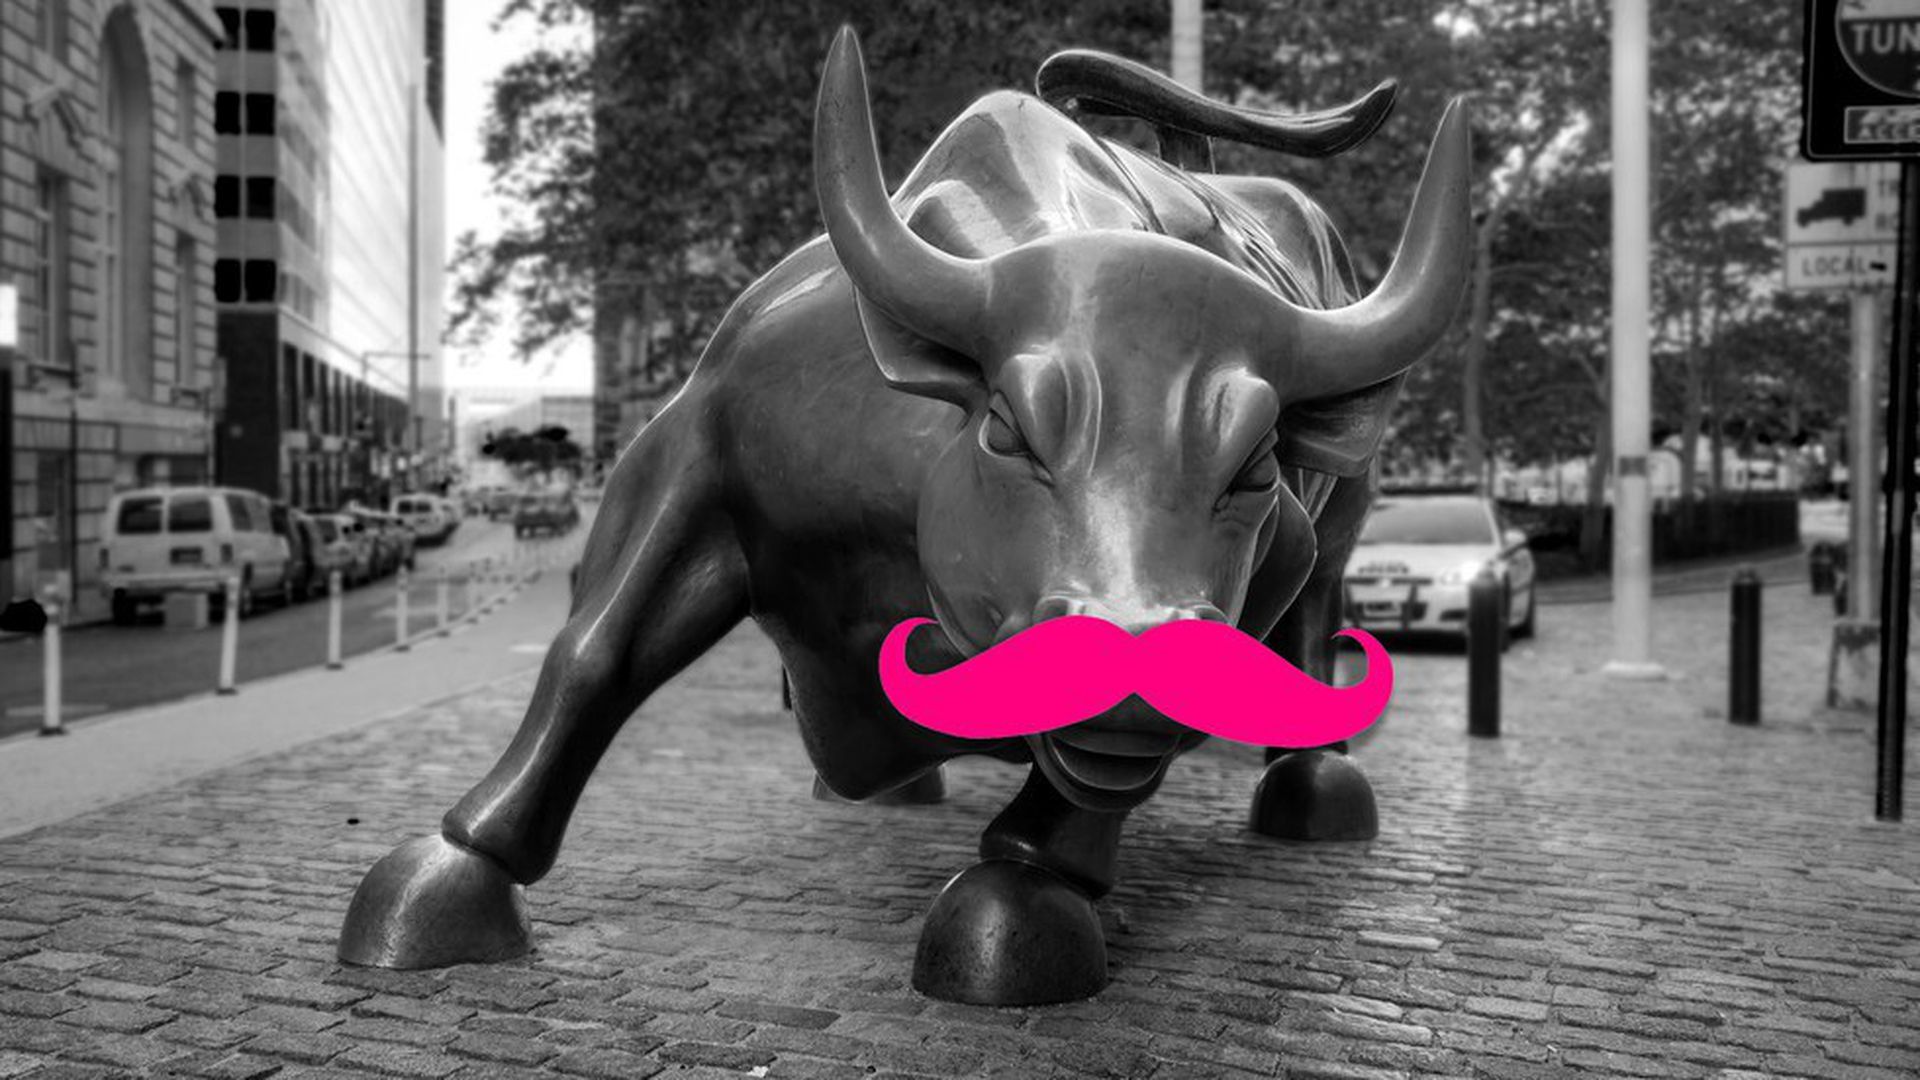 The Wall Street bull with a Lyft mustache